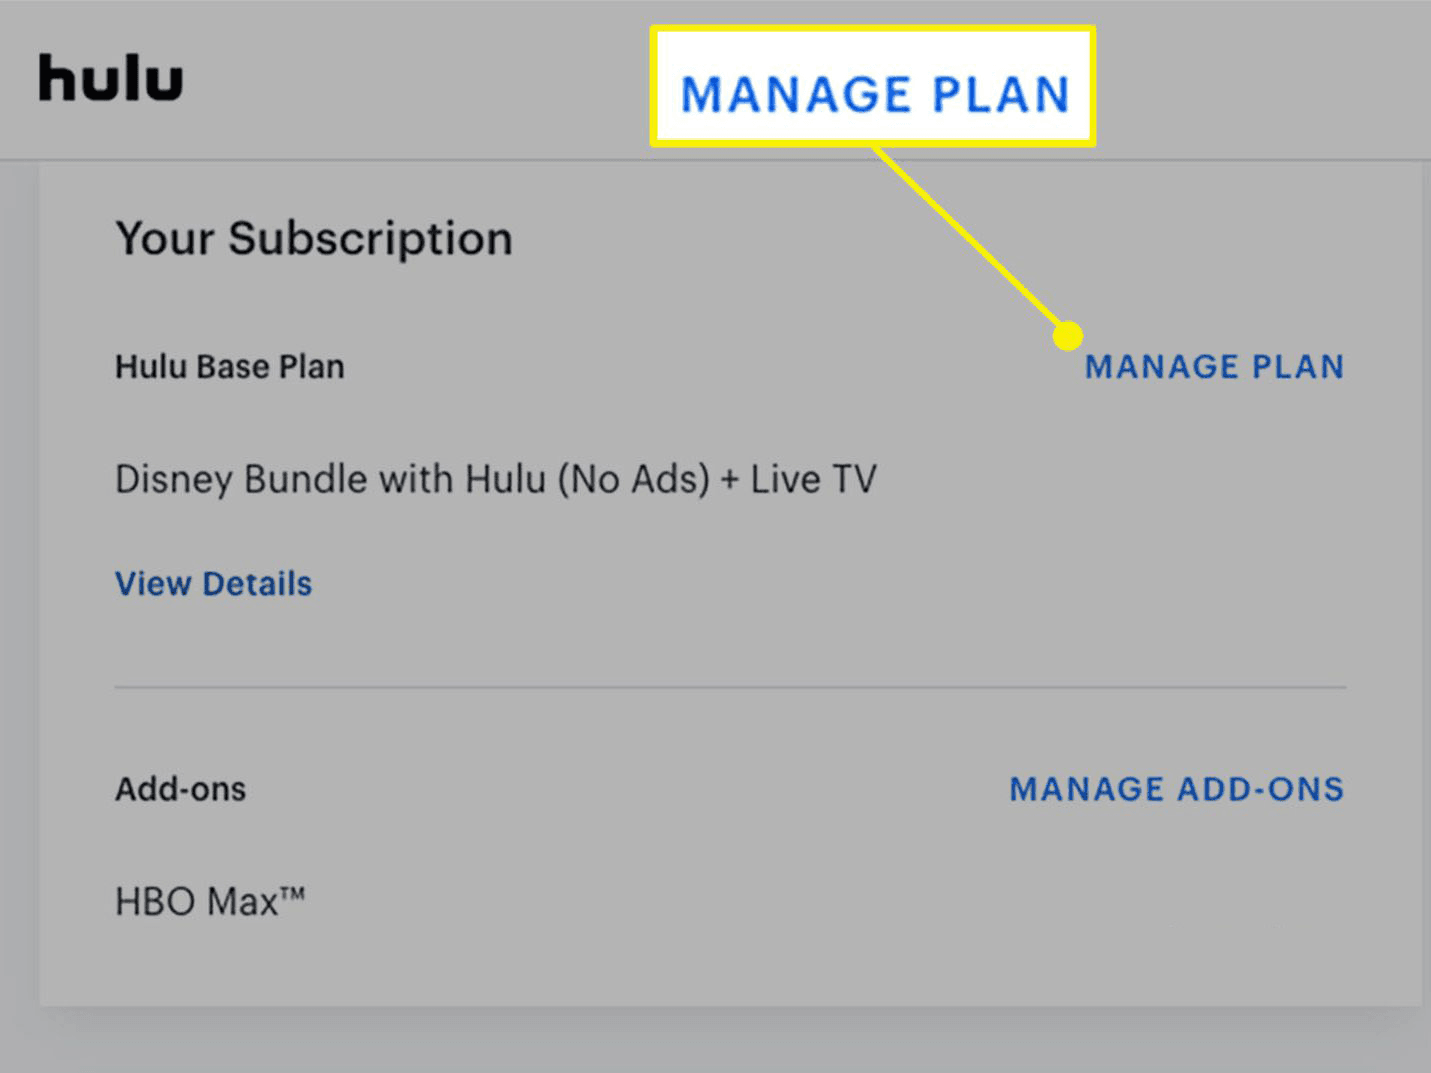 Click Manage Plan to change your account settings on the Hulu site.